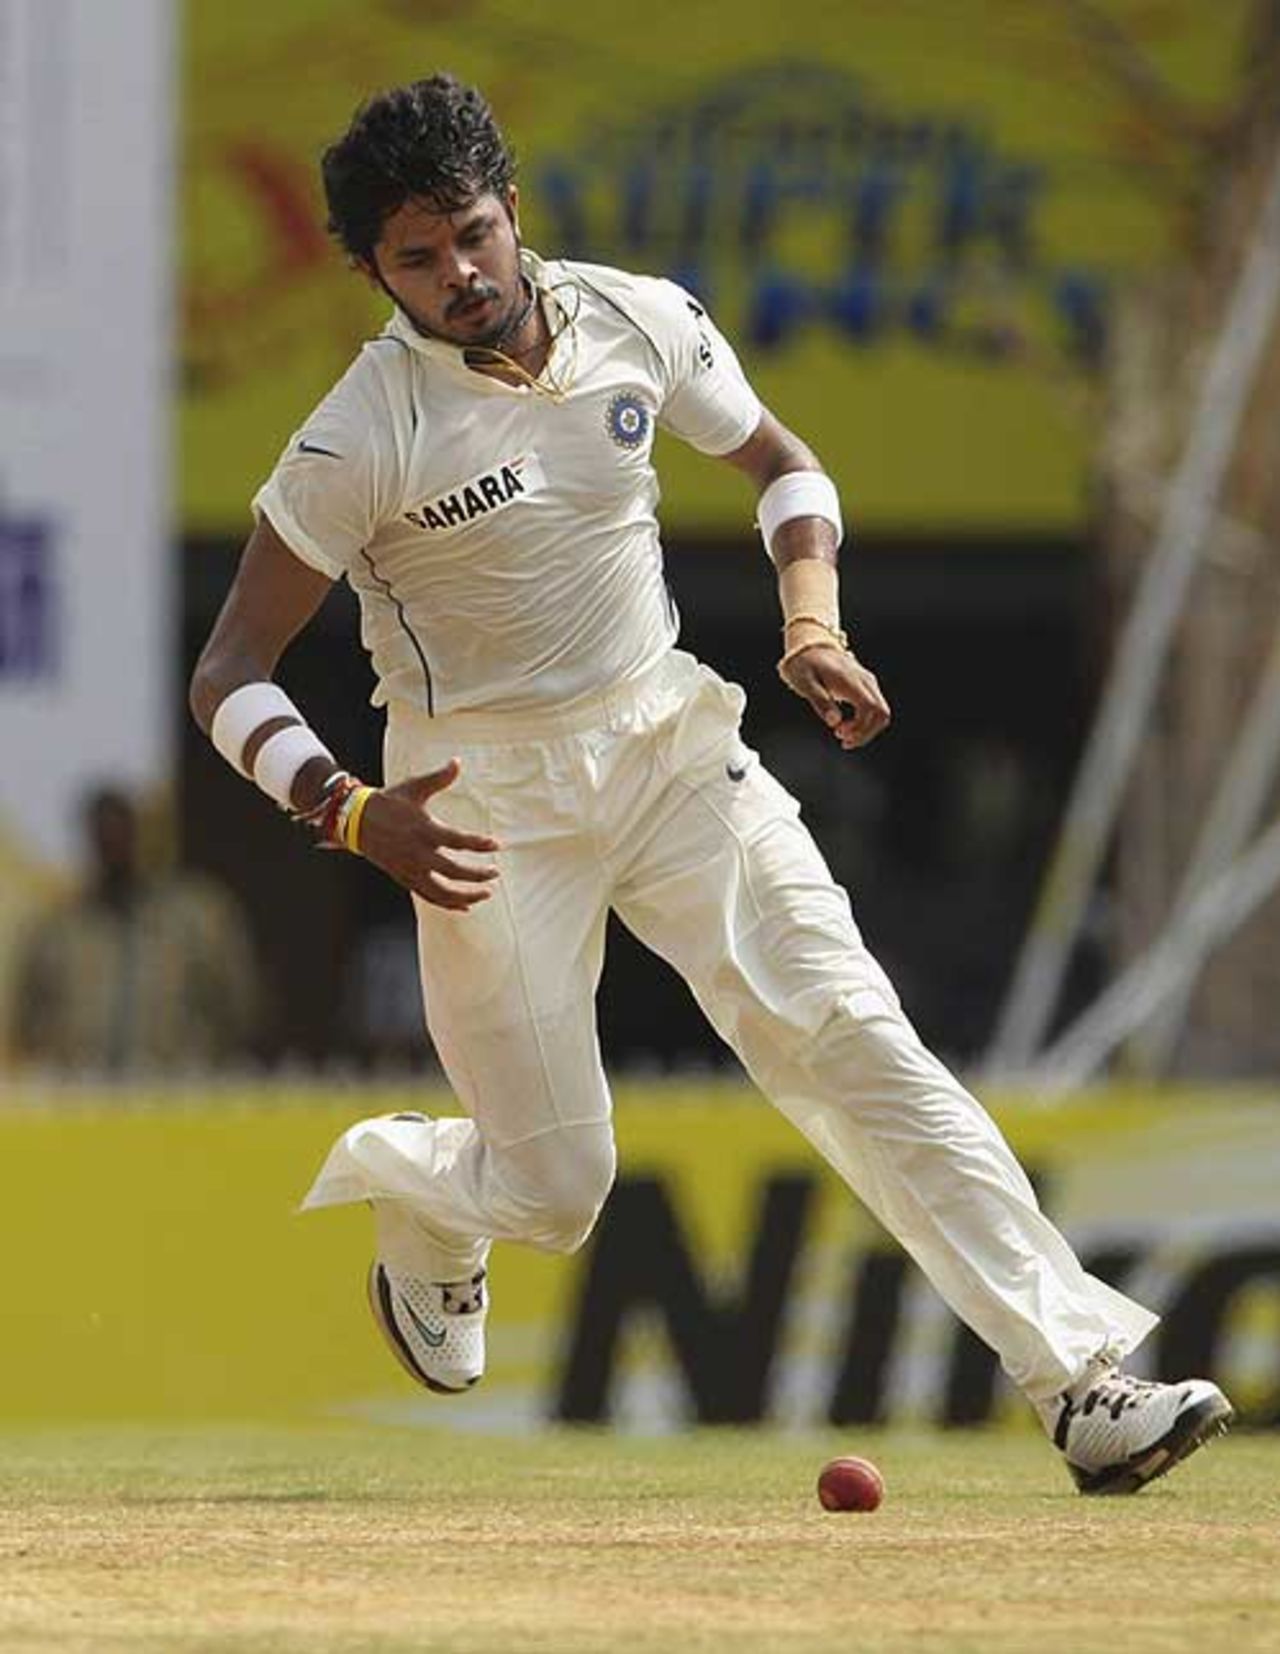 Sreesanth moves to field off his own bowling, India v South Africa, 1st Test, Chennai, 5th day, March 30, 2008 